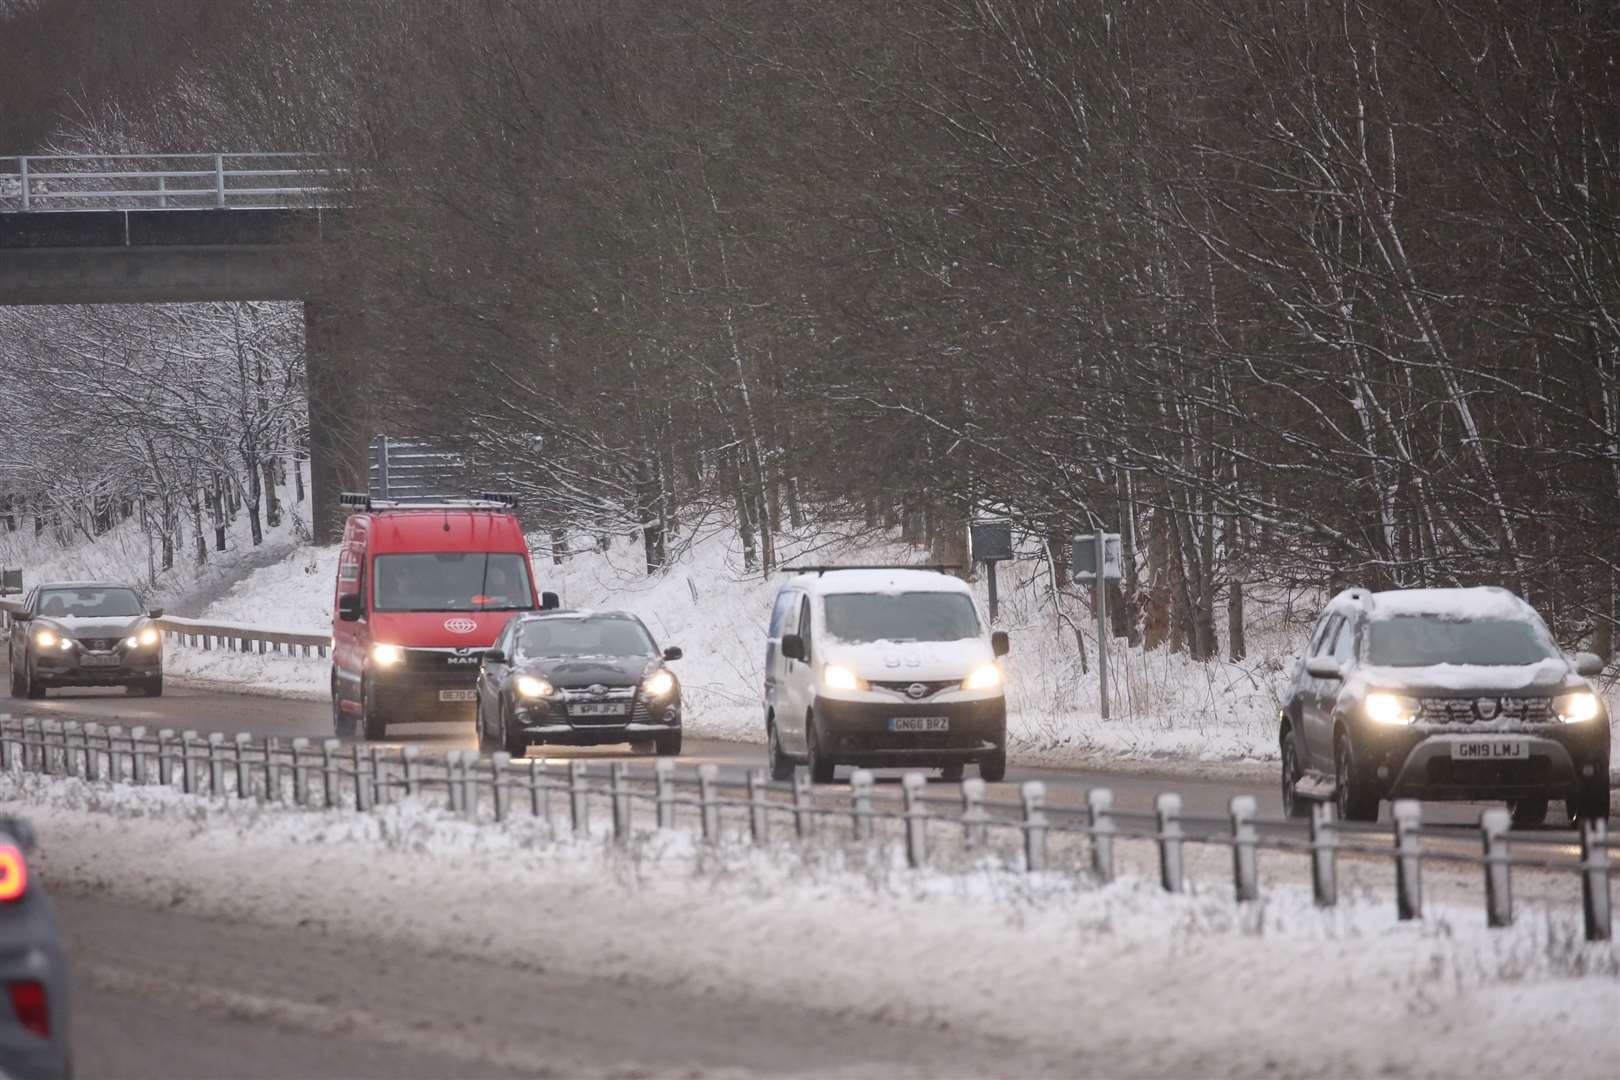 People driving in the snow. Credit: UKNiP